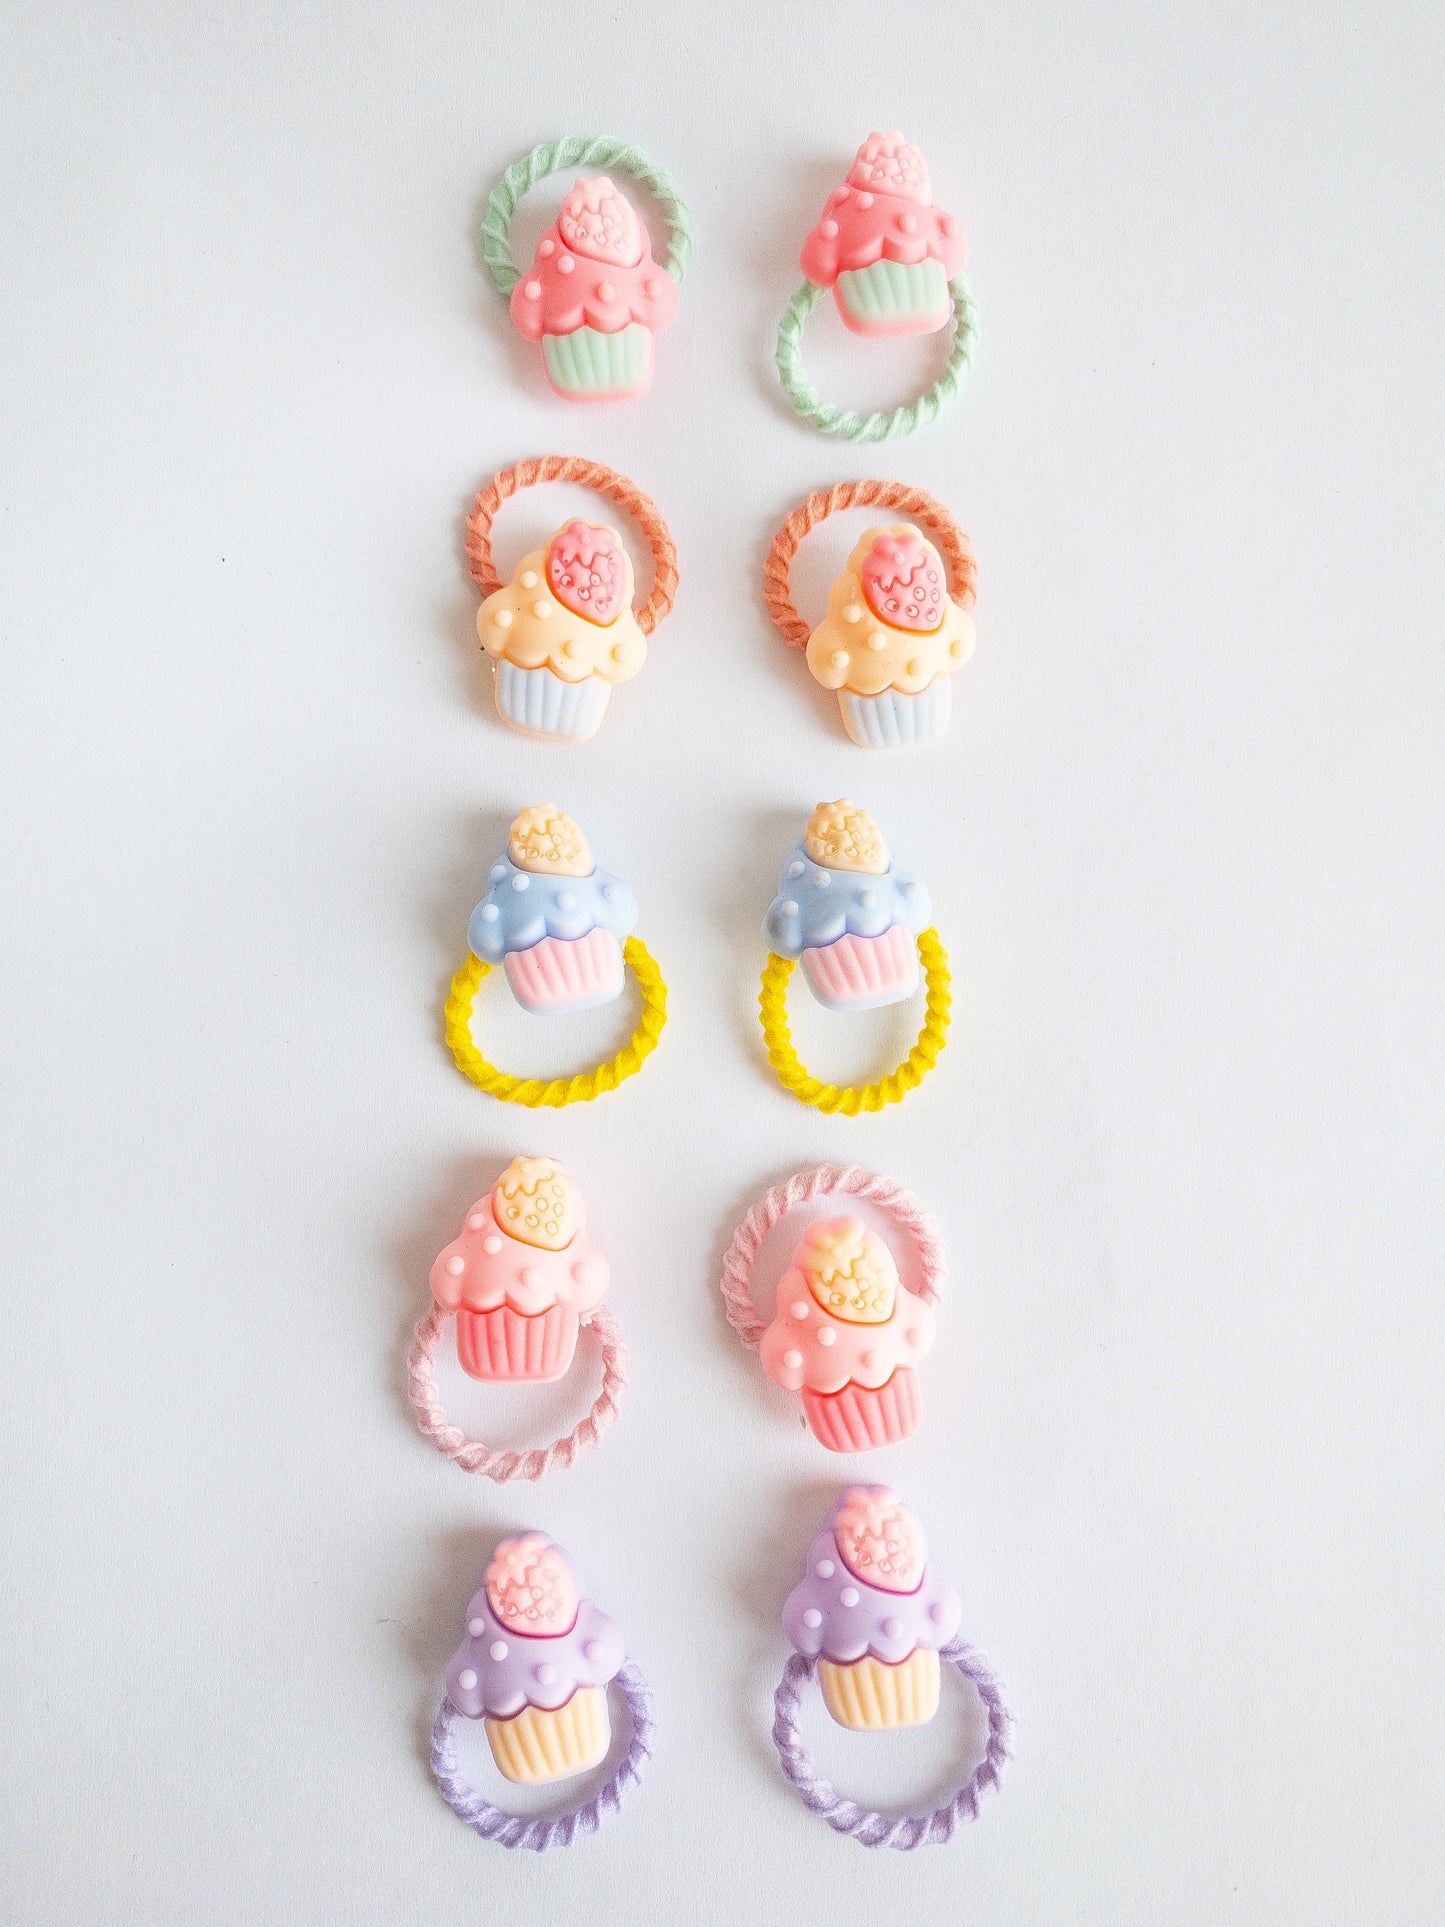 Candy colored little strawberry cupcake hair ties in sweet sets. These 10 hair ties come in pairs and are a great size for fun styles. The soft hair ties are gentle on hair and the sweetened mini cakes just give it that extra pop.